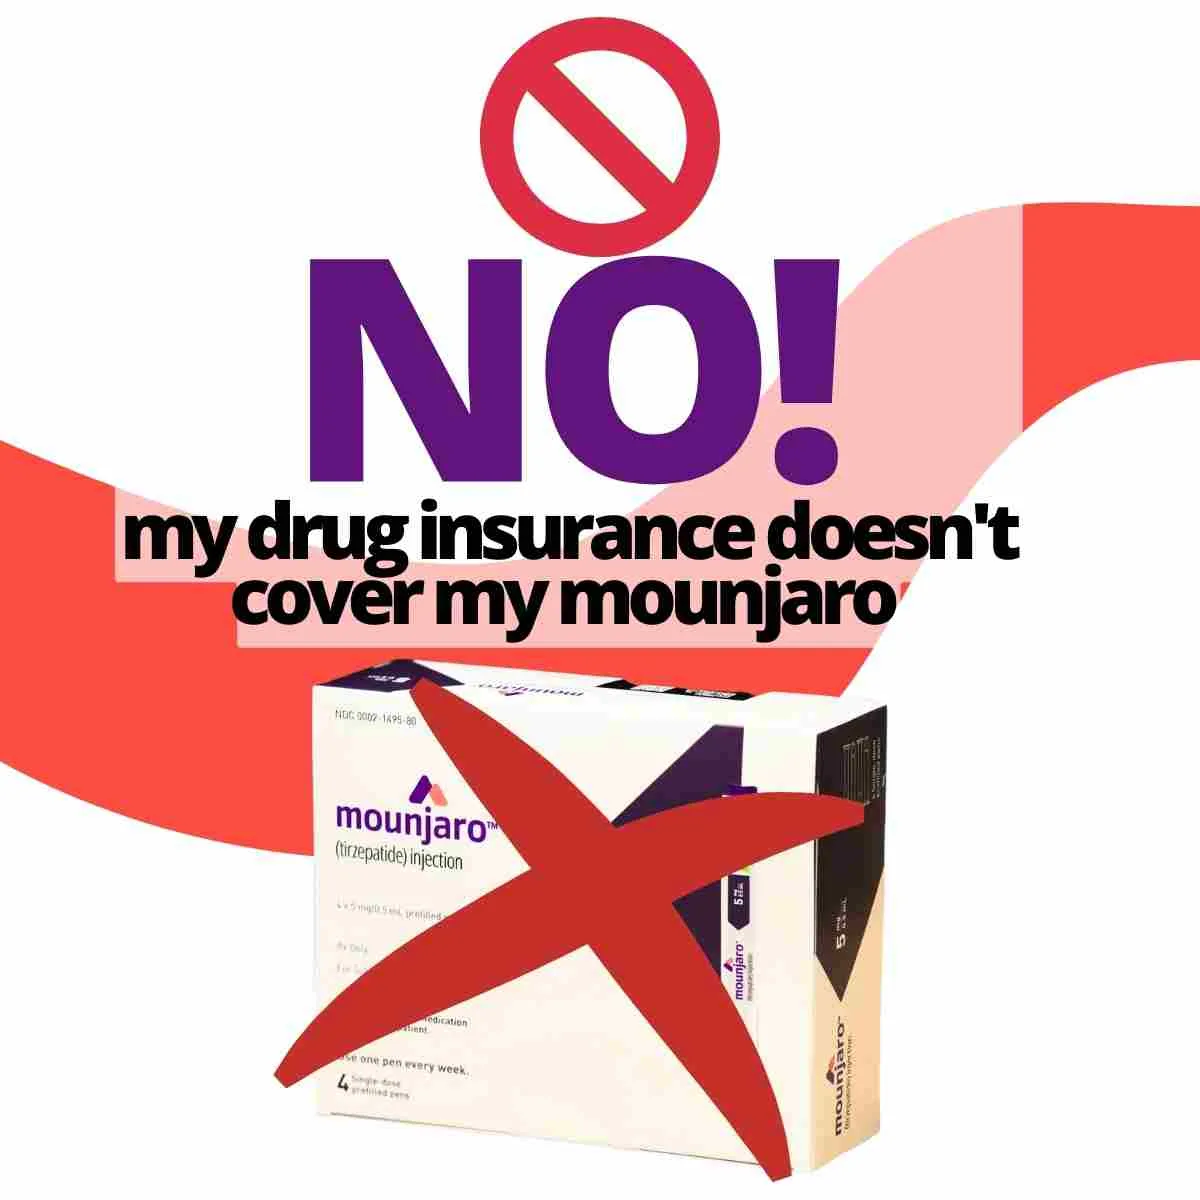 no my drug insurance does not cover my mounjaro